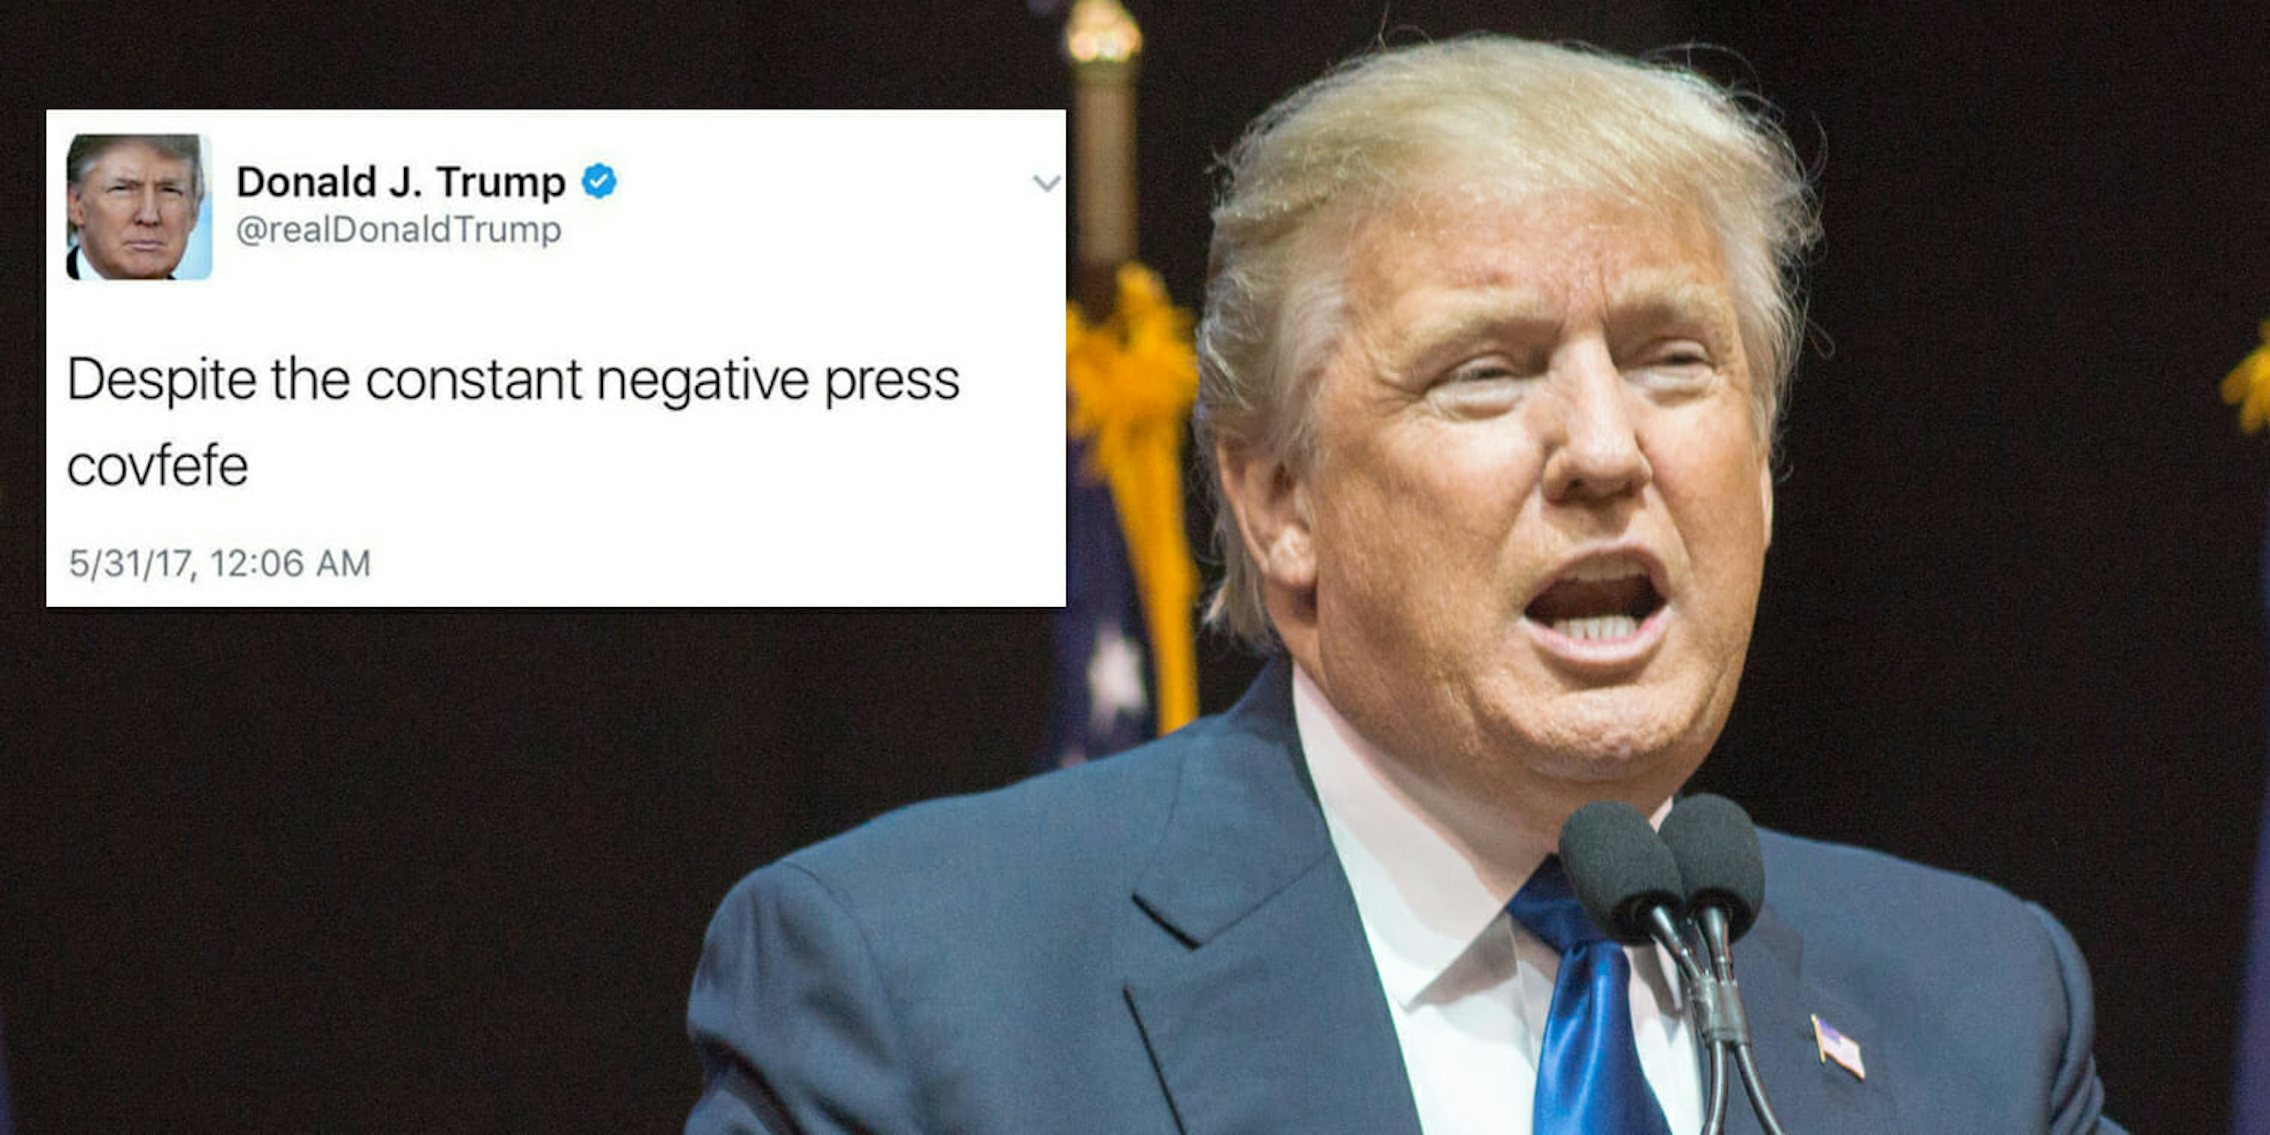 It's the one year anniversary of Trump's covfefe tweet. People are calling it Covfefe Day.